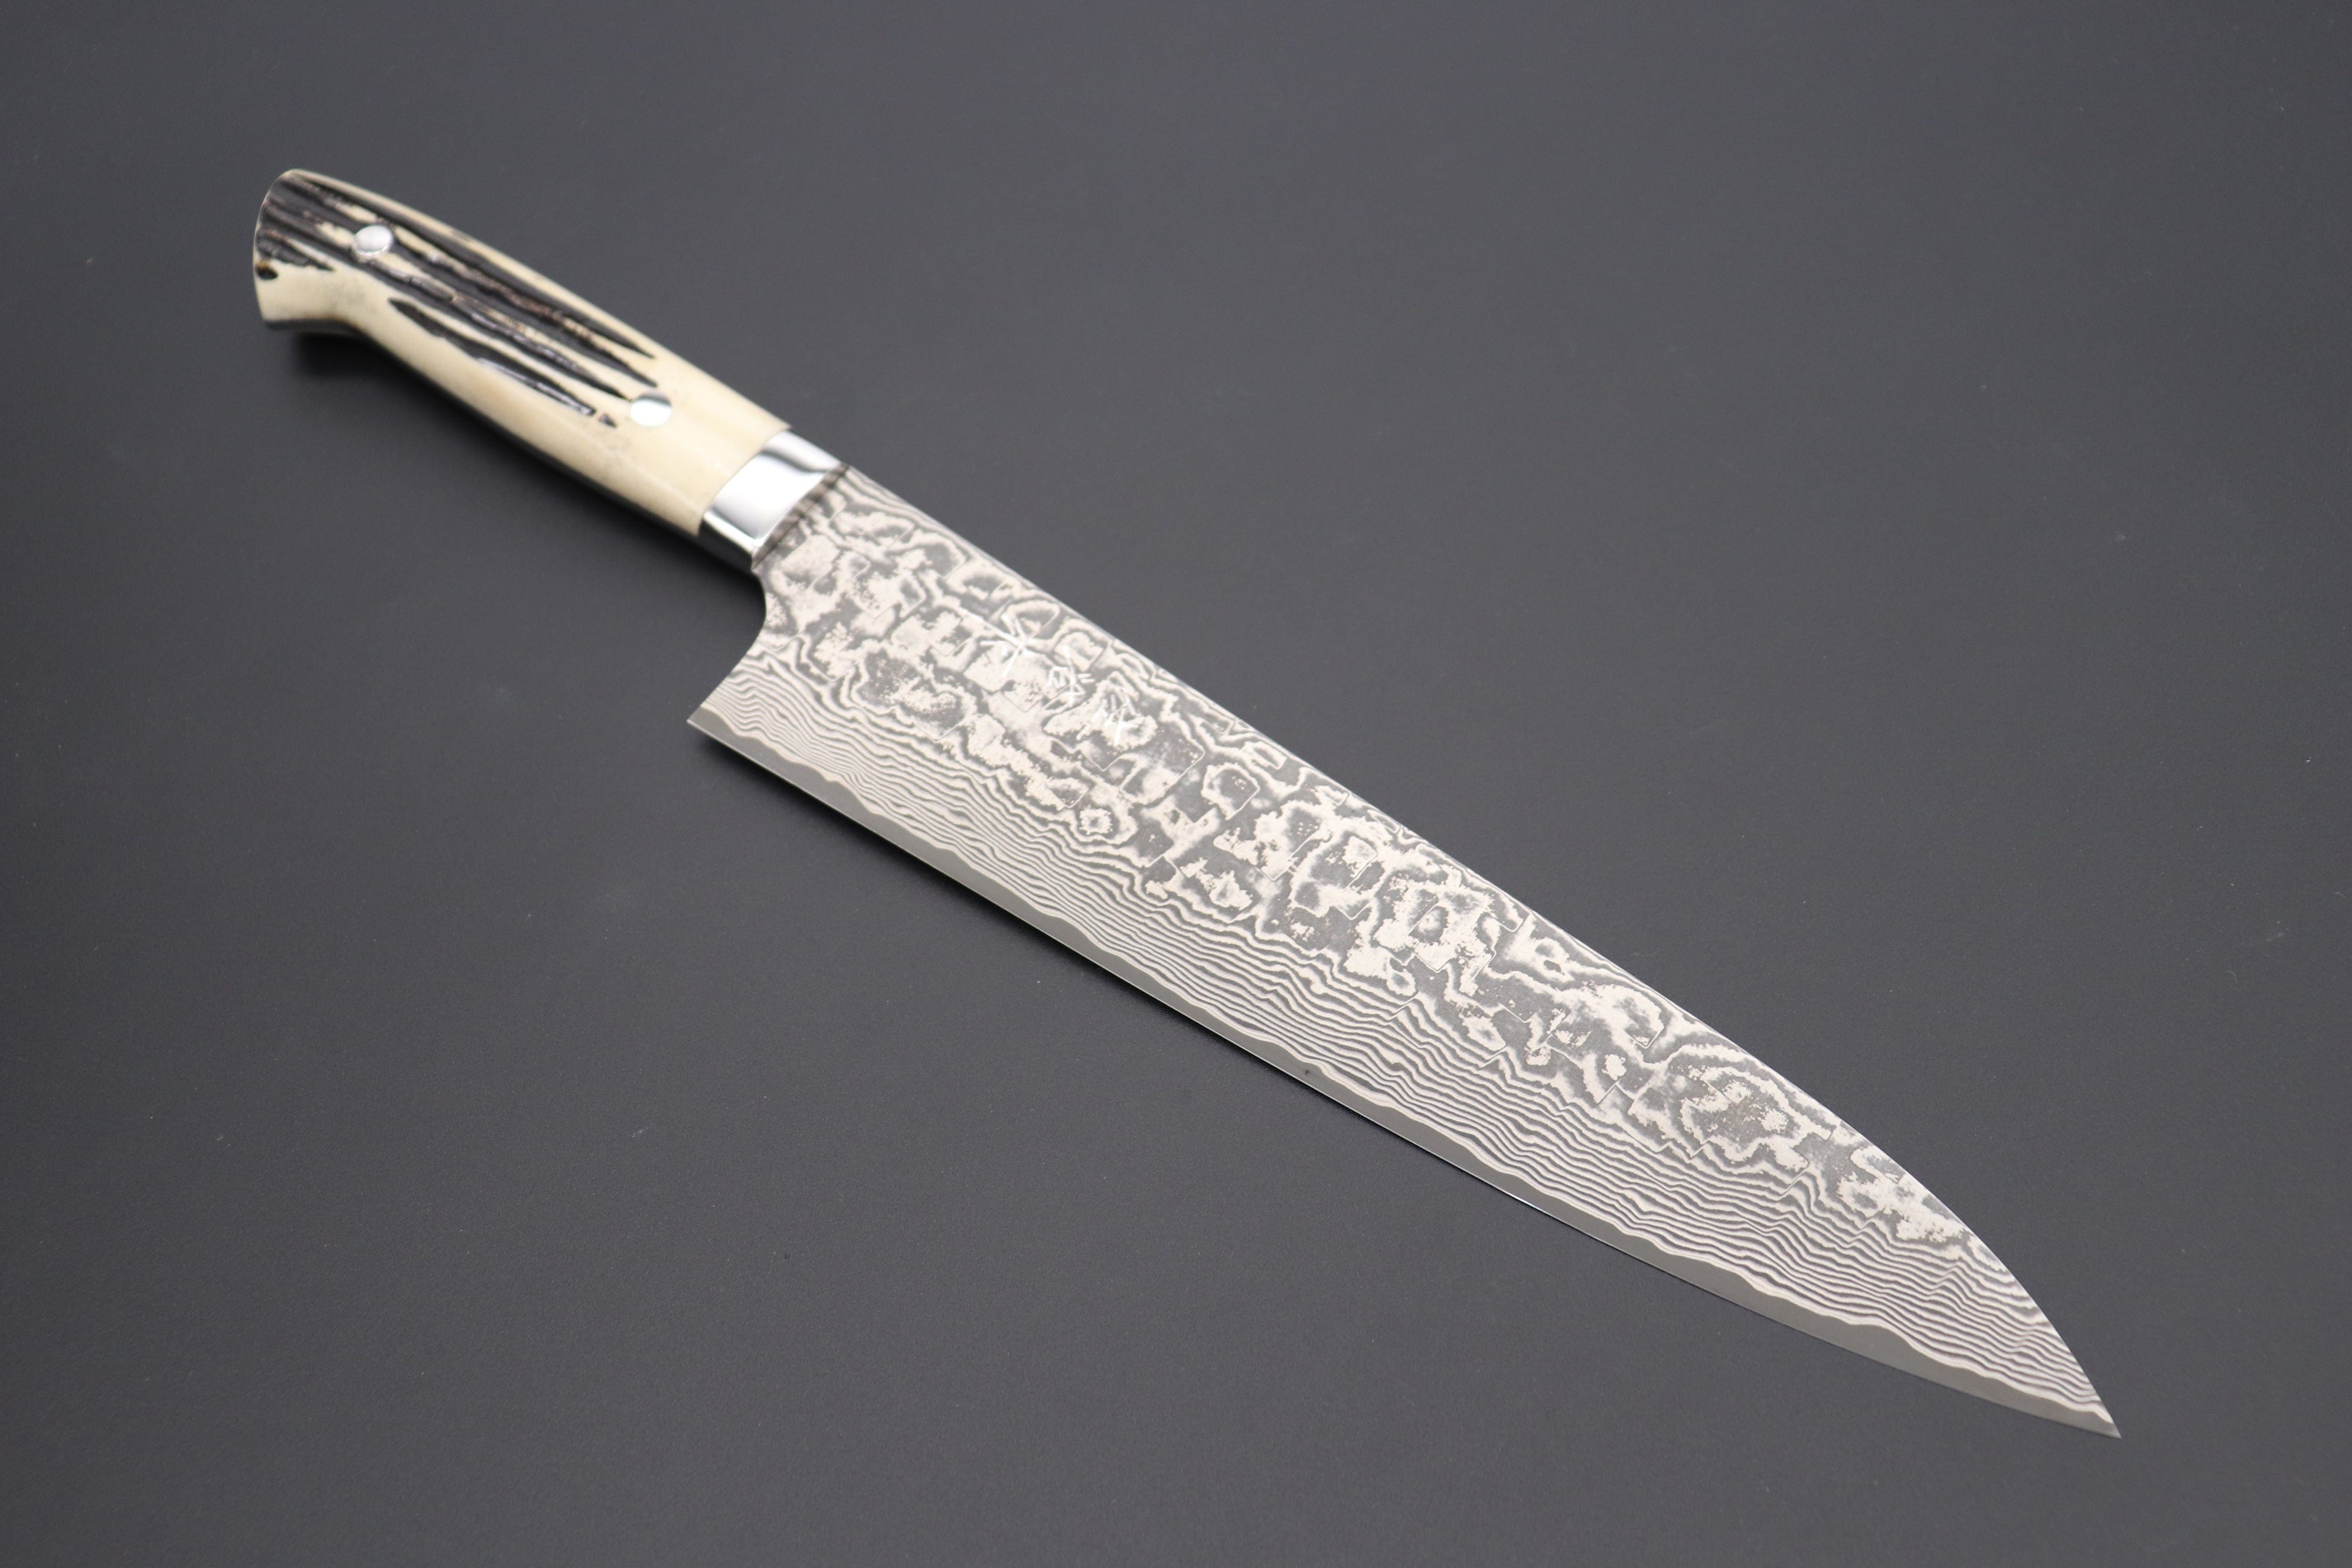 Chinese Old School Kitchen Knife High Carbon Steel 100% Handmade